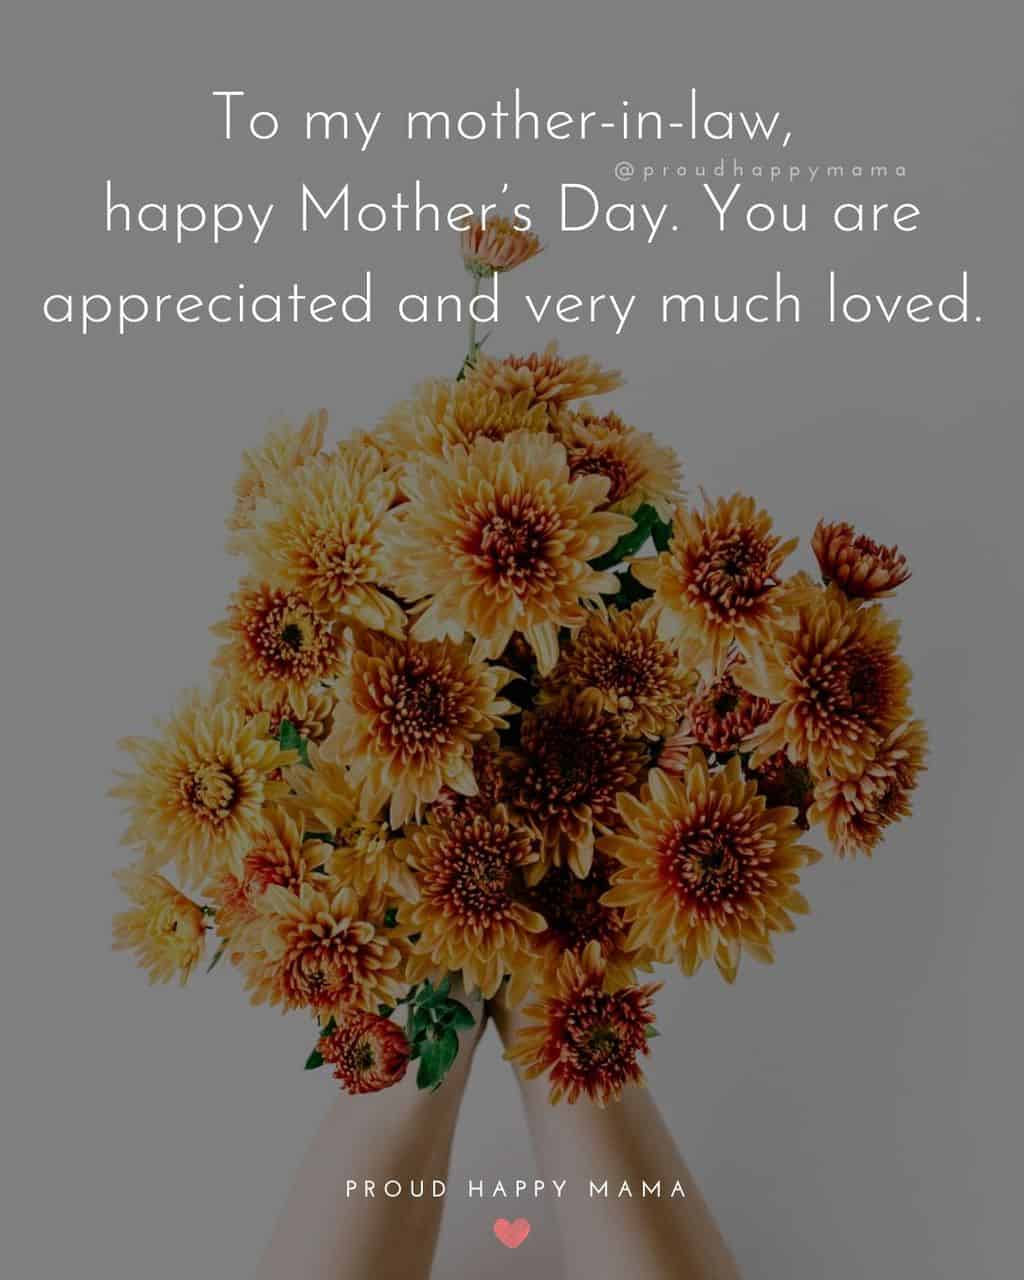 Happy Mothers Day Quotes For Mother In Law - To my mother in law, happy Mother’s Day. You are appreciated and very much loved.’